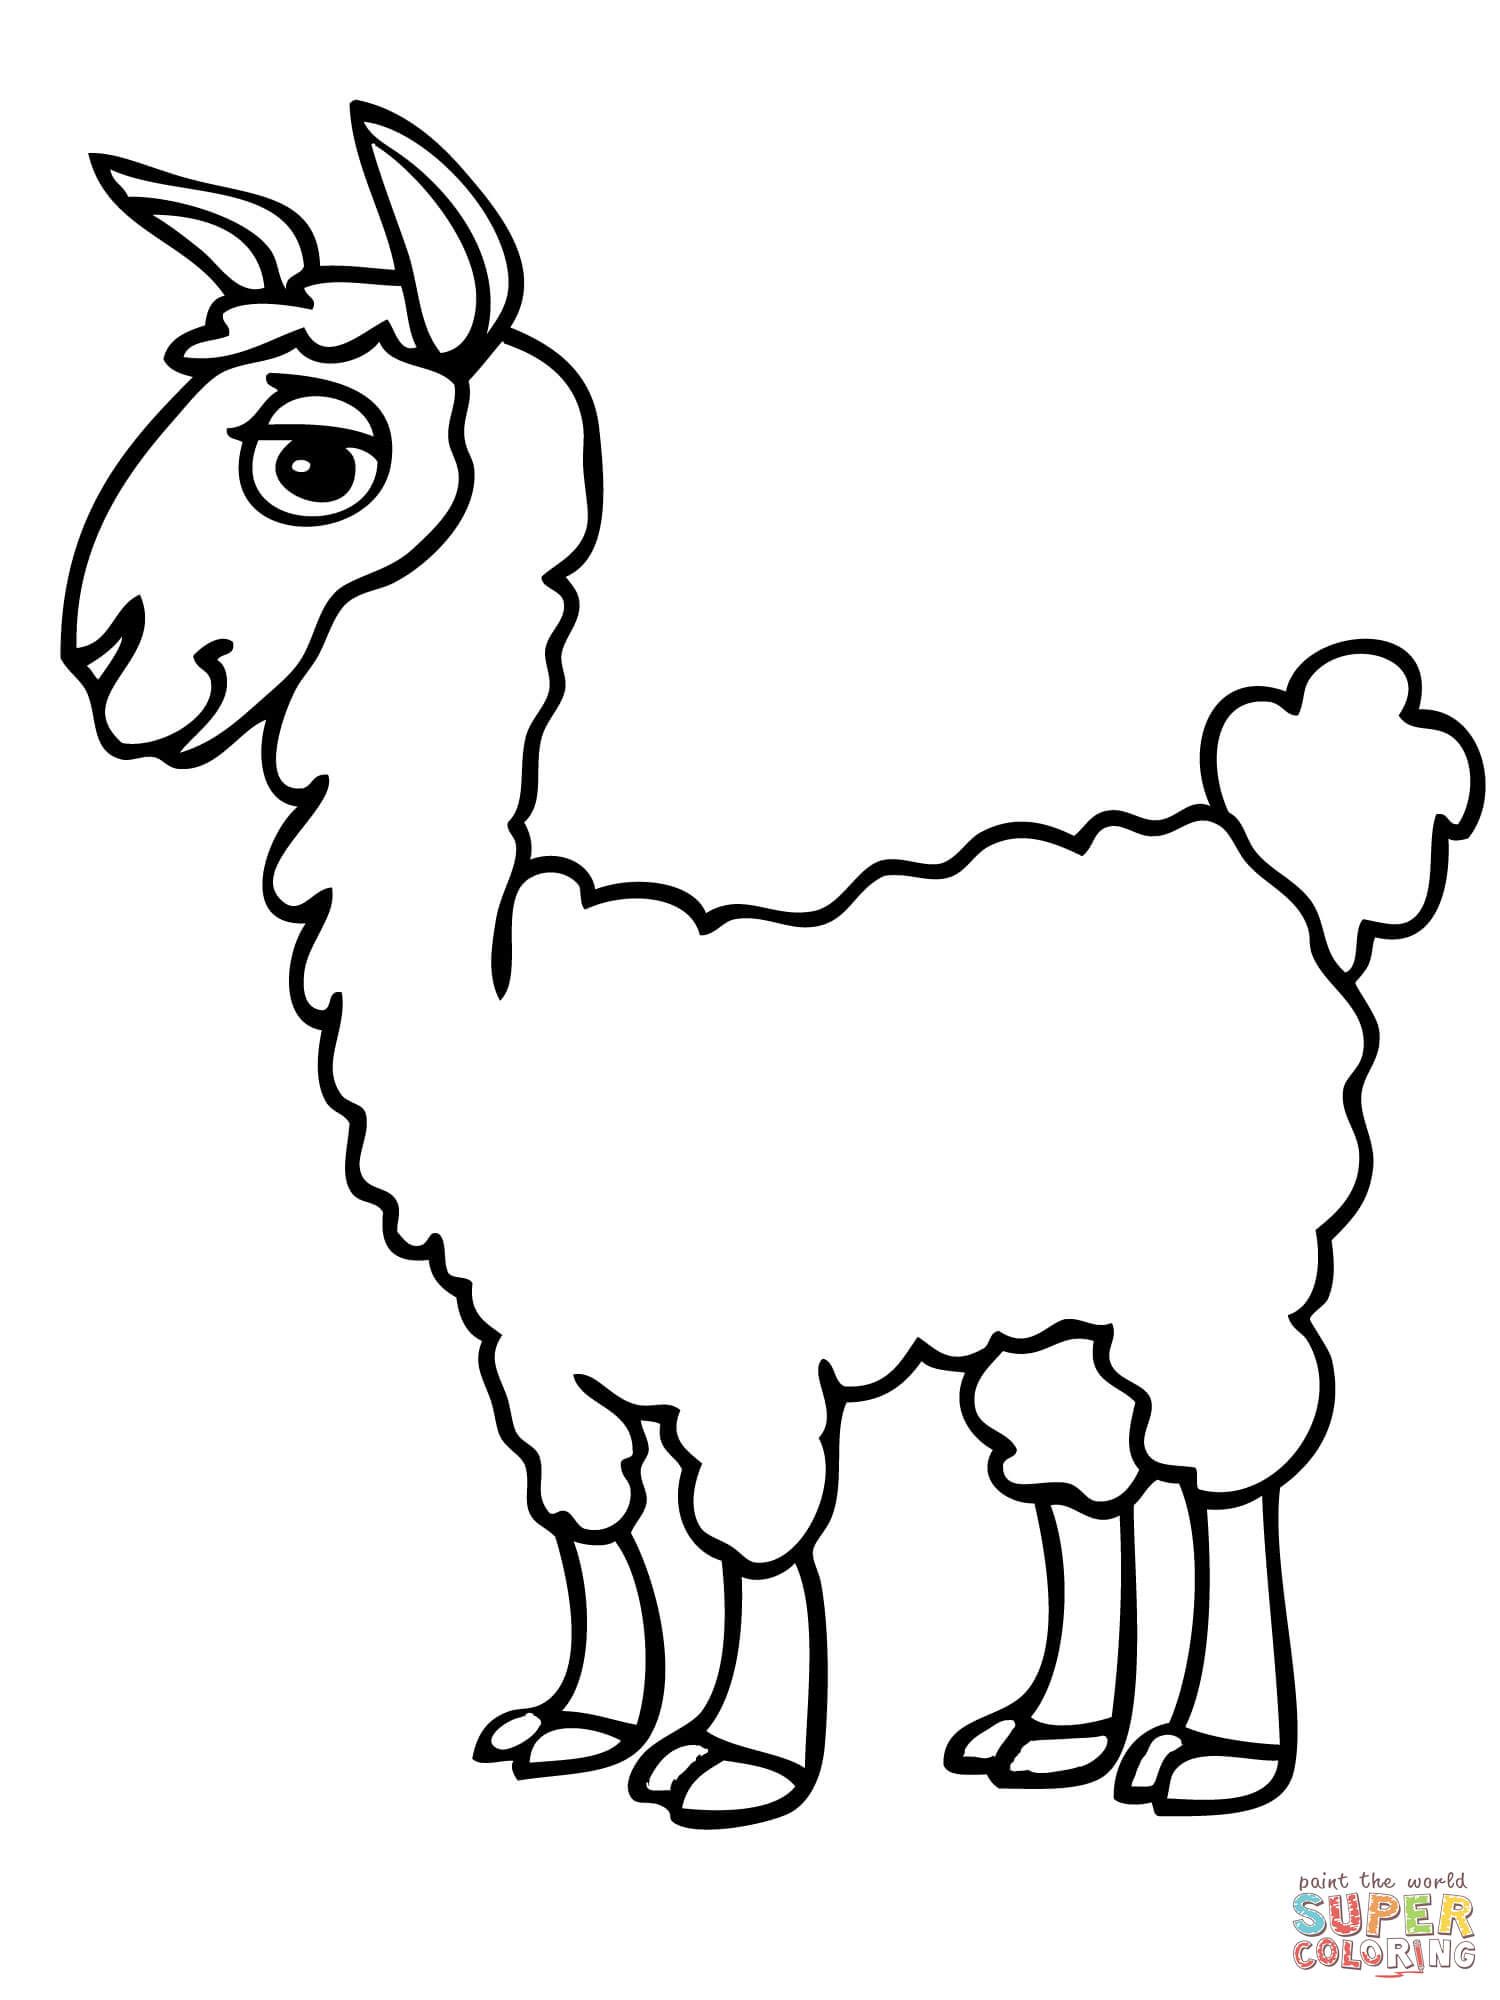 Cute Alpaca coloring page | Free Printable Coloring Pages | Unicorn coloring  pages, Cute coloring pages, Monkey coloring pages